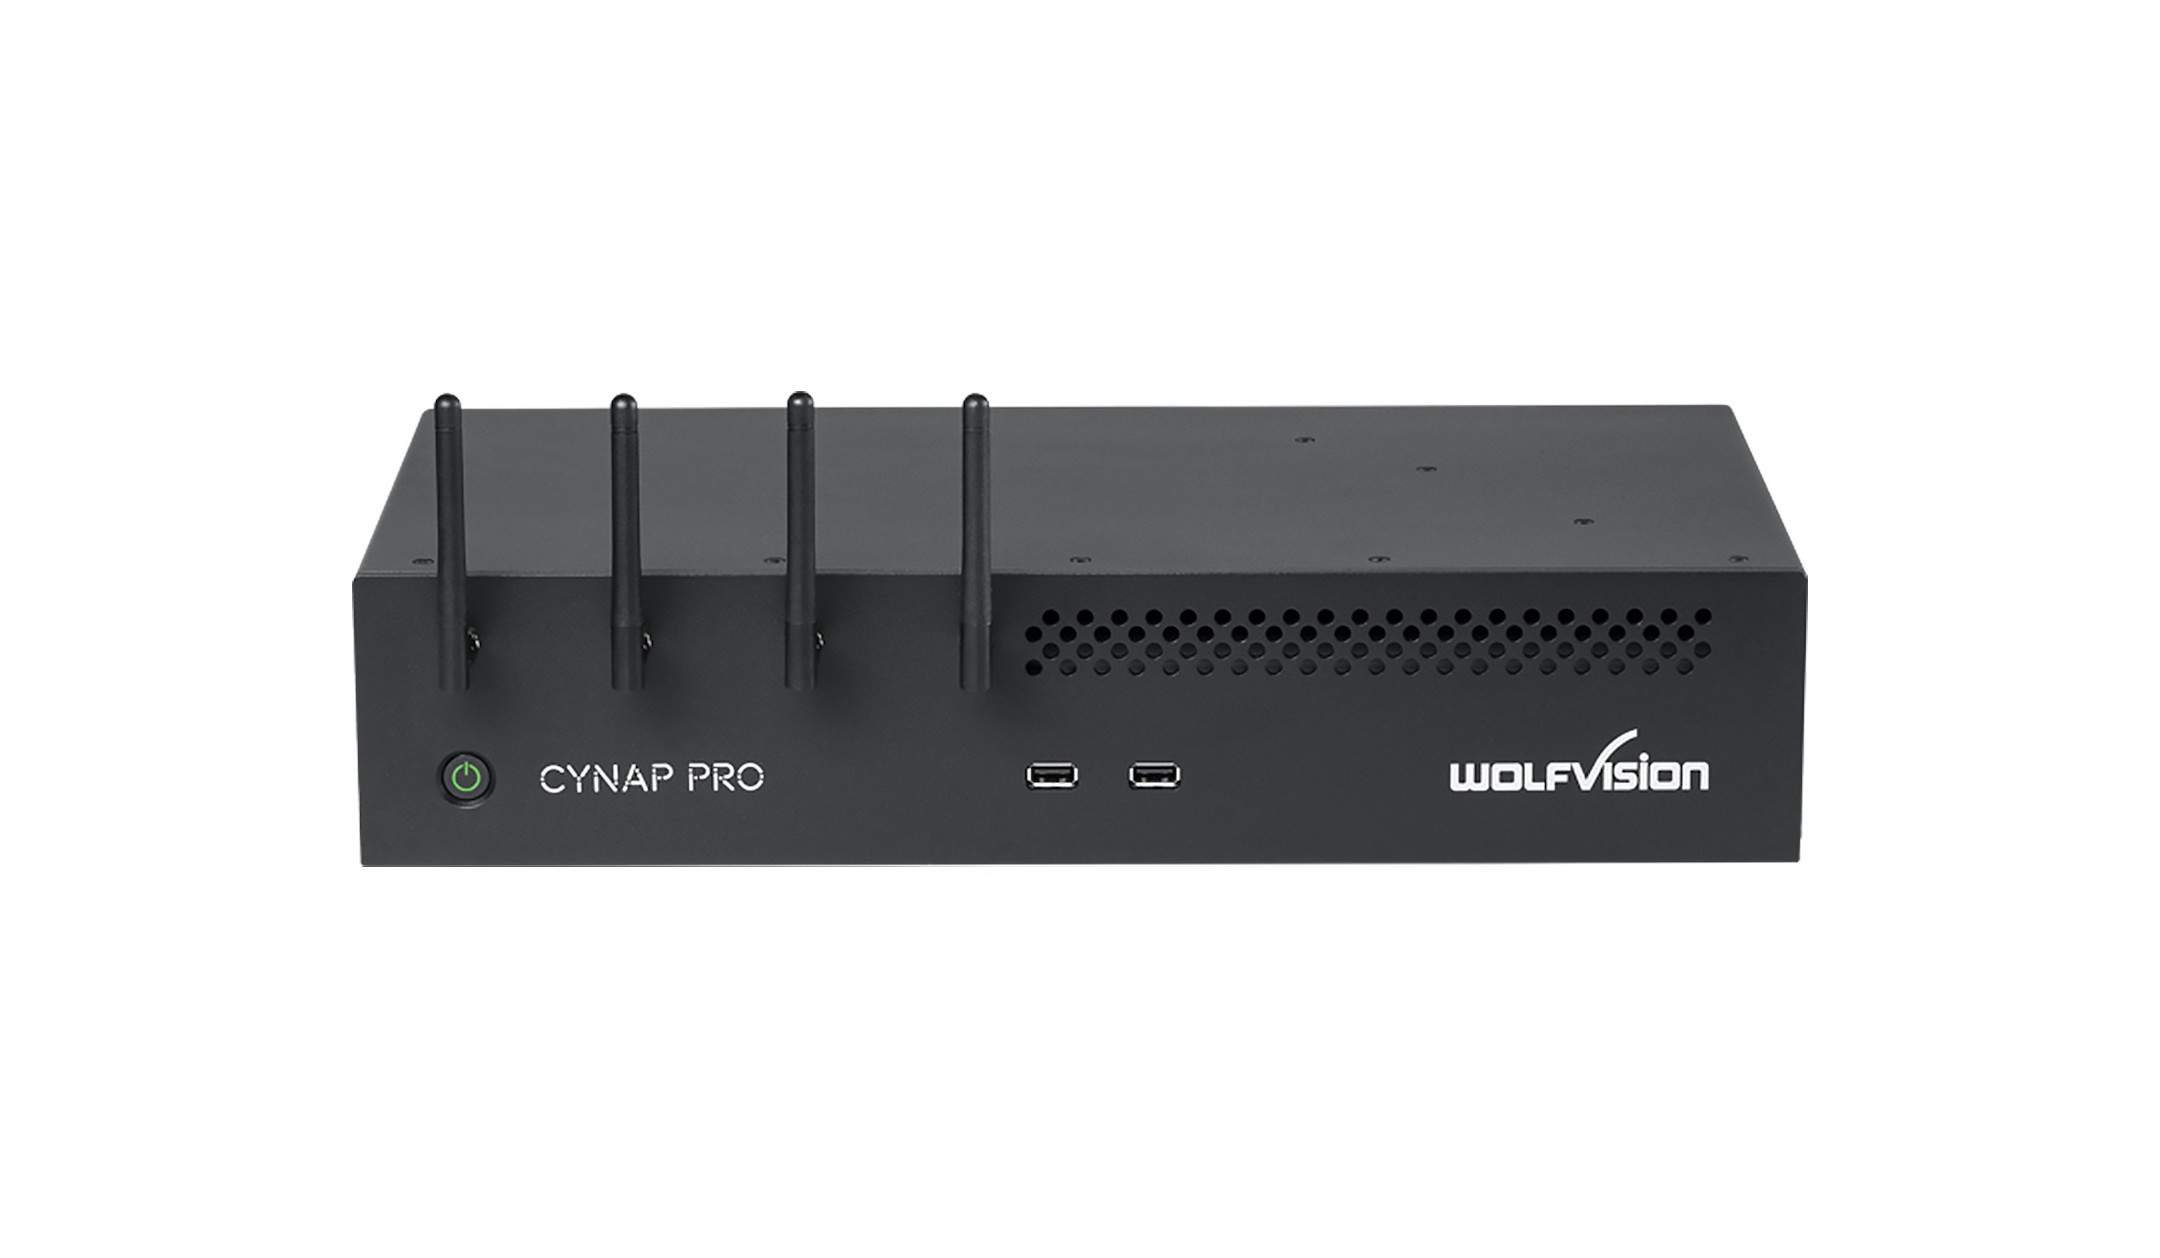 Wolfvision-Cynap-Pro-HDMI-HDBaseT-OUT-Version-C-drahtloses-All-in-One-Prasentationssystem